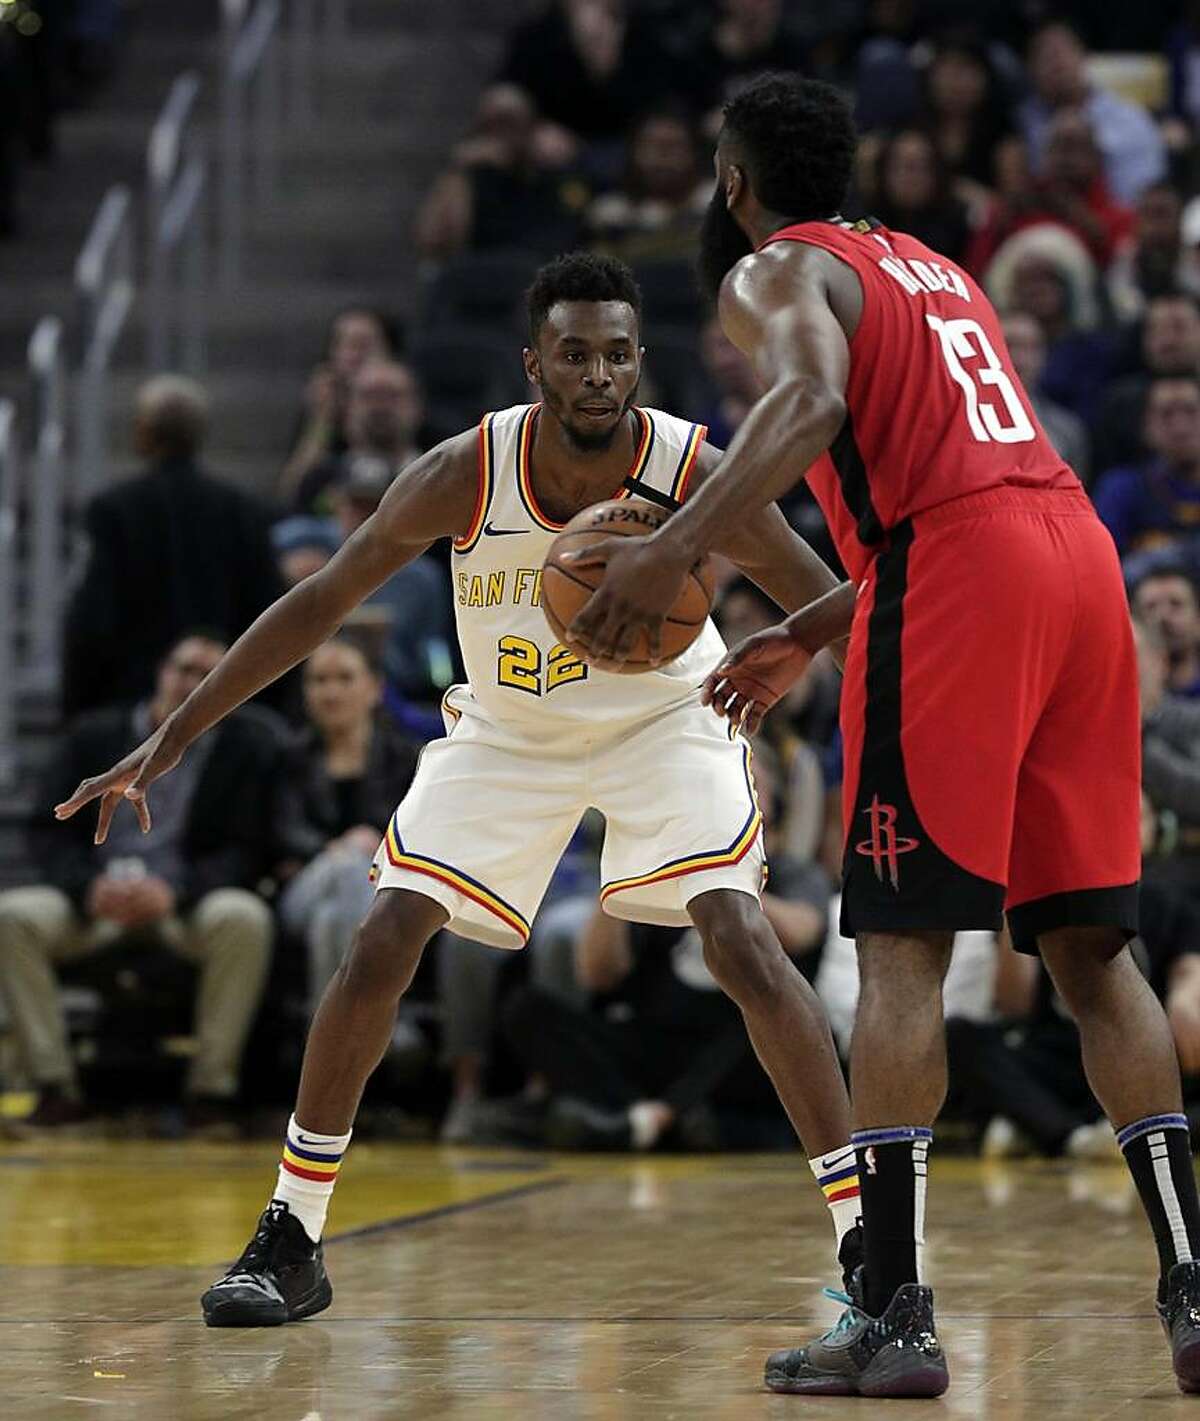 Andrew Wiggins (22) defends against James Harden (13) In the first half as the Golden State Warriors played the Houston Rockets at Chase Center in San Francisco, Calif., on Thursday, February 20, 2020.